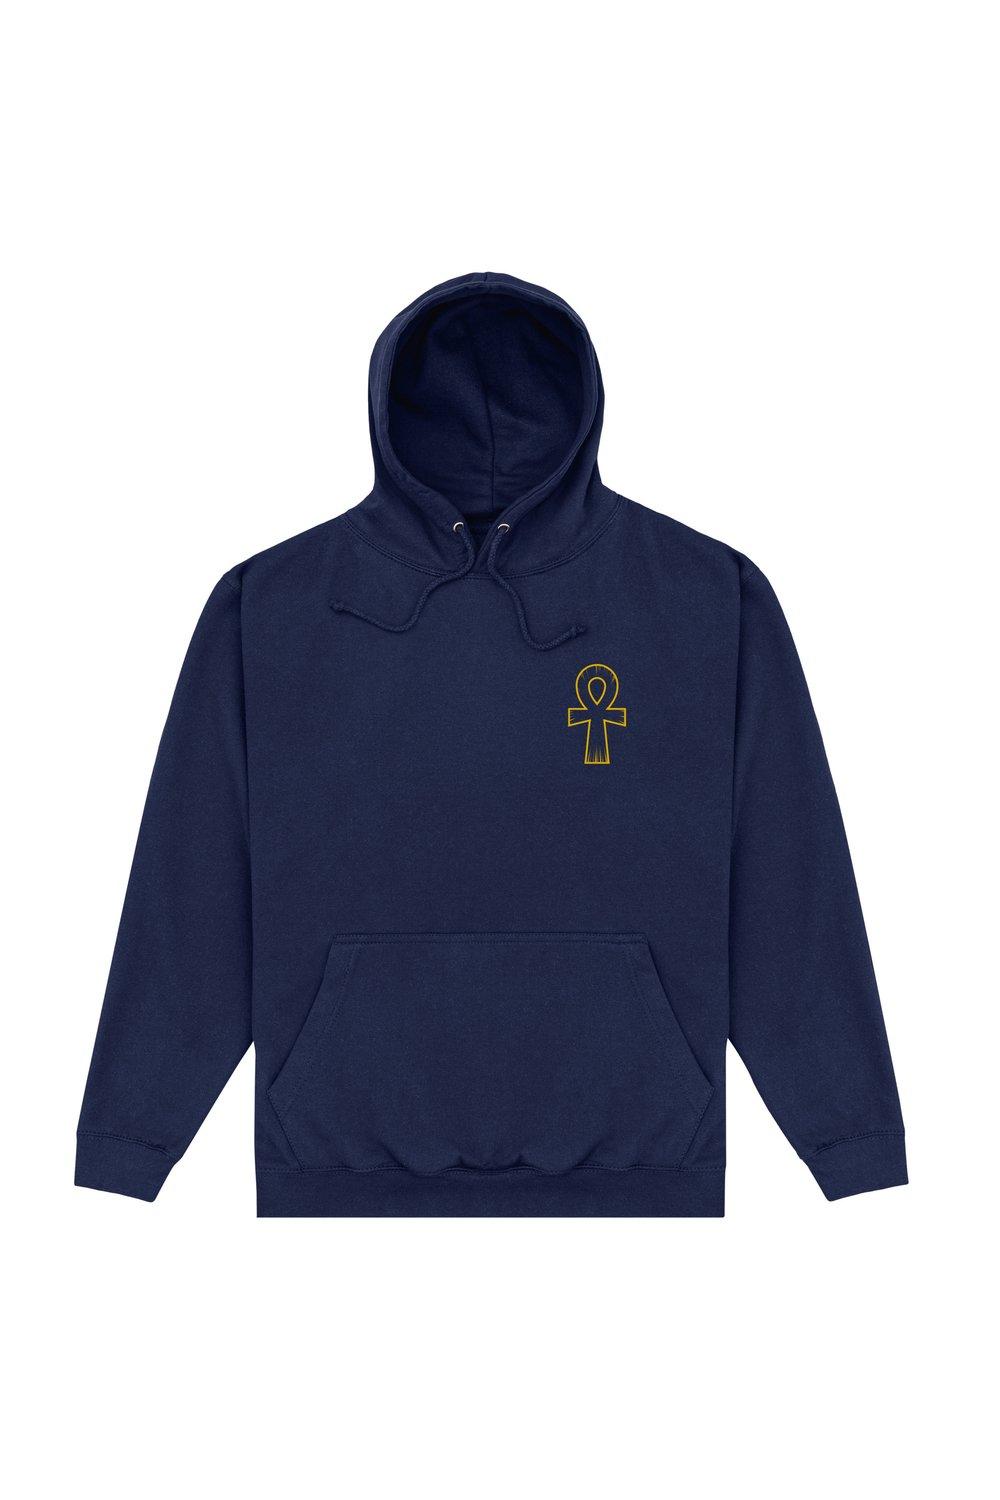 Dr. Fate Hoodie